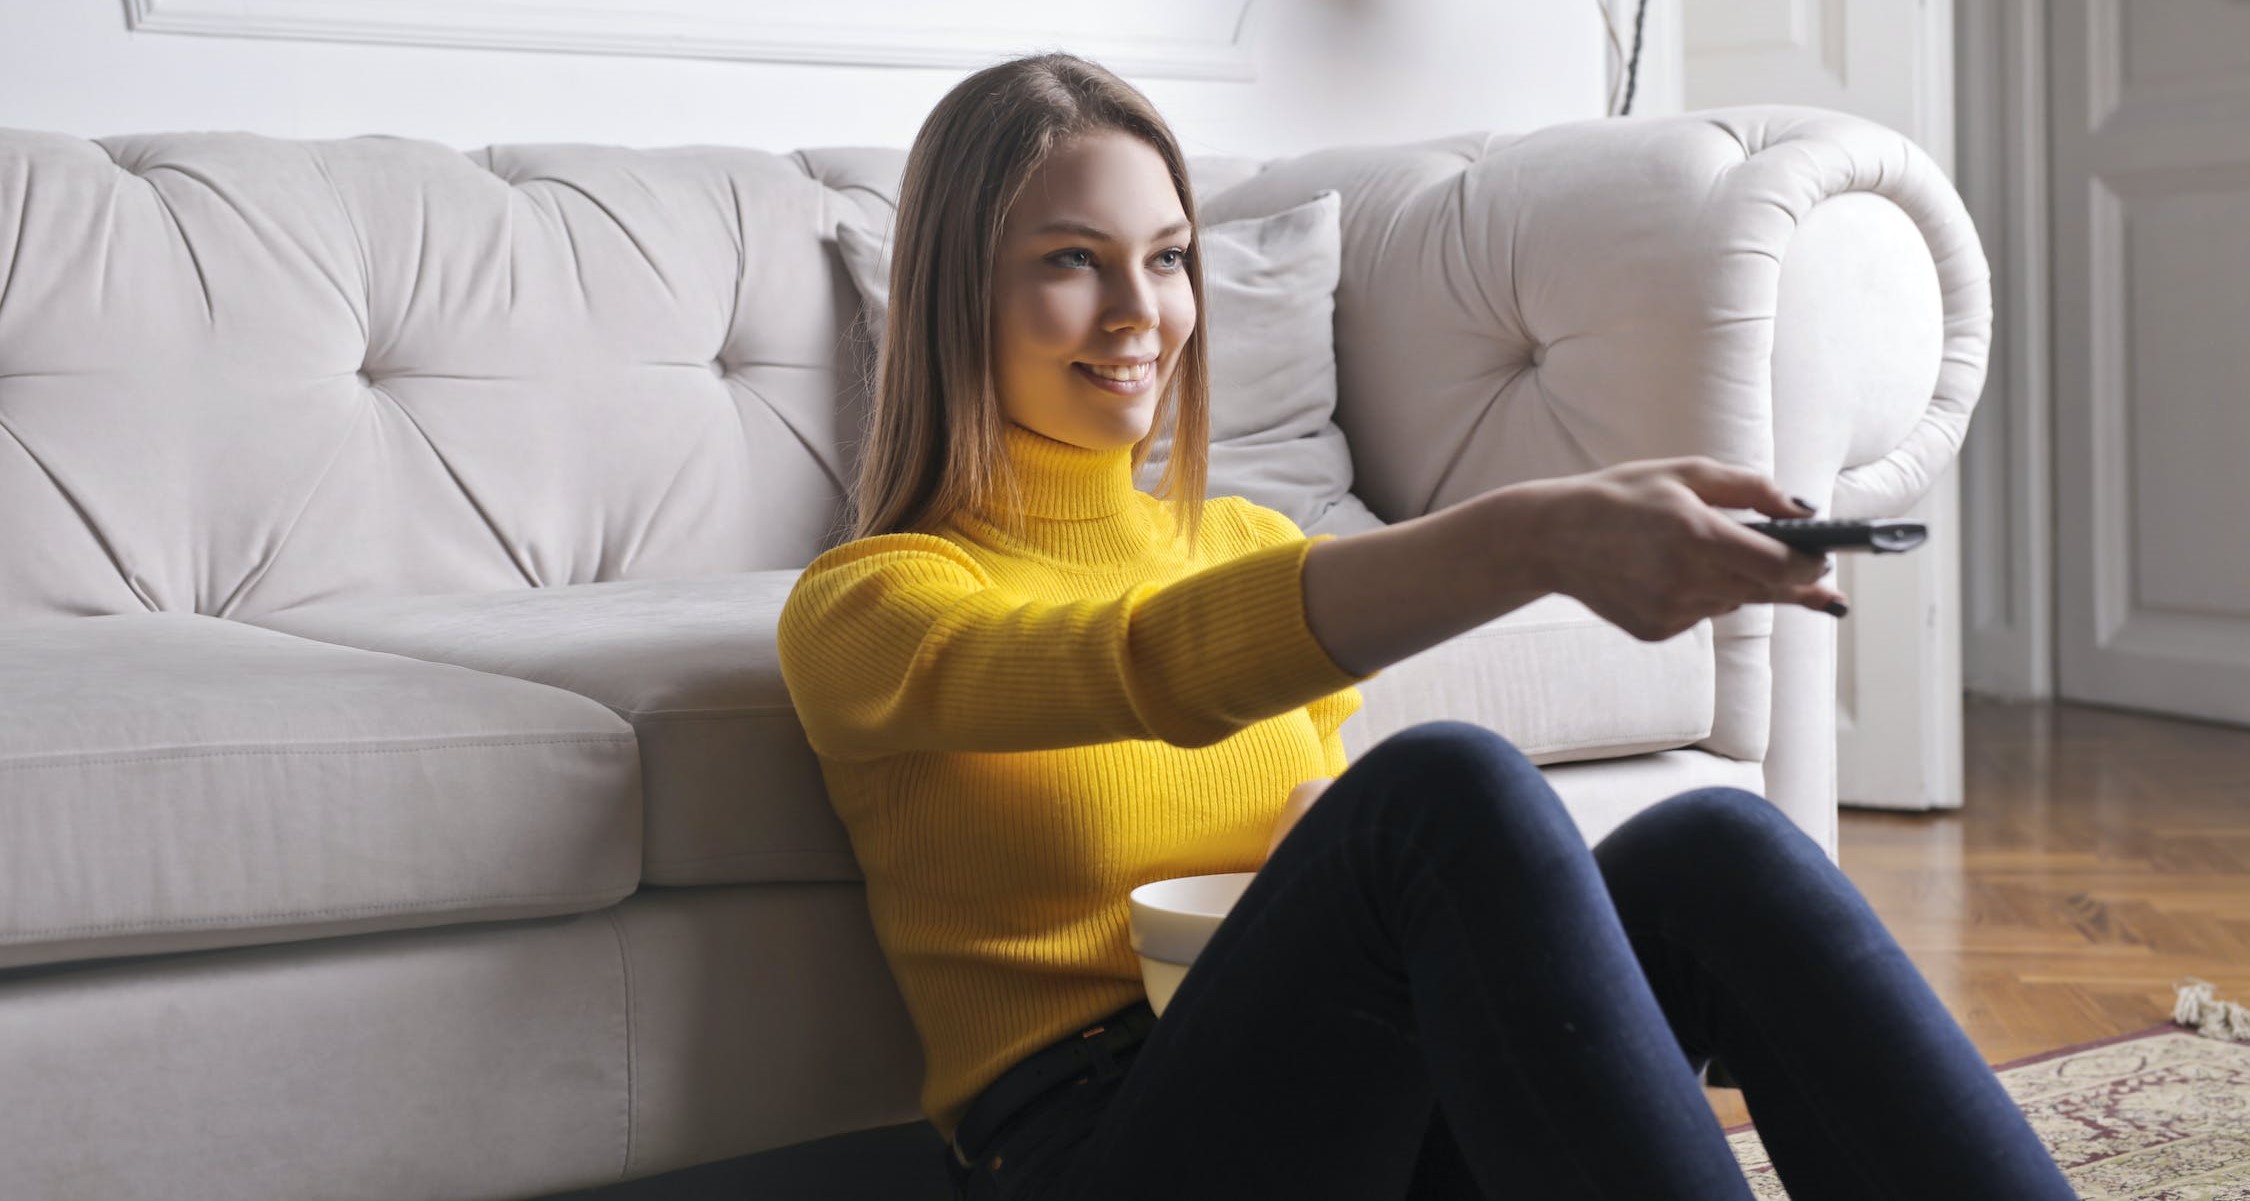 Woman sits in front of a sofa while pointing a remote control